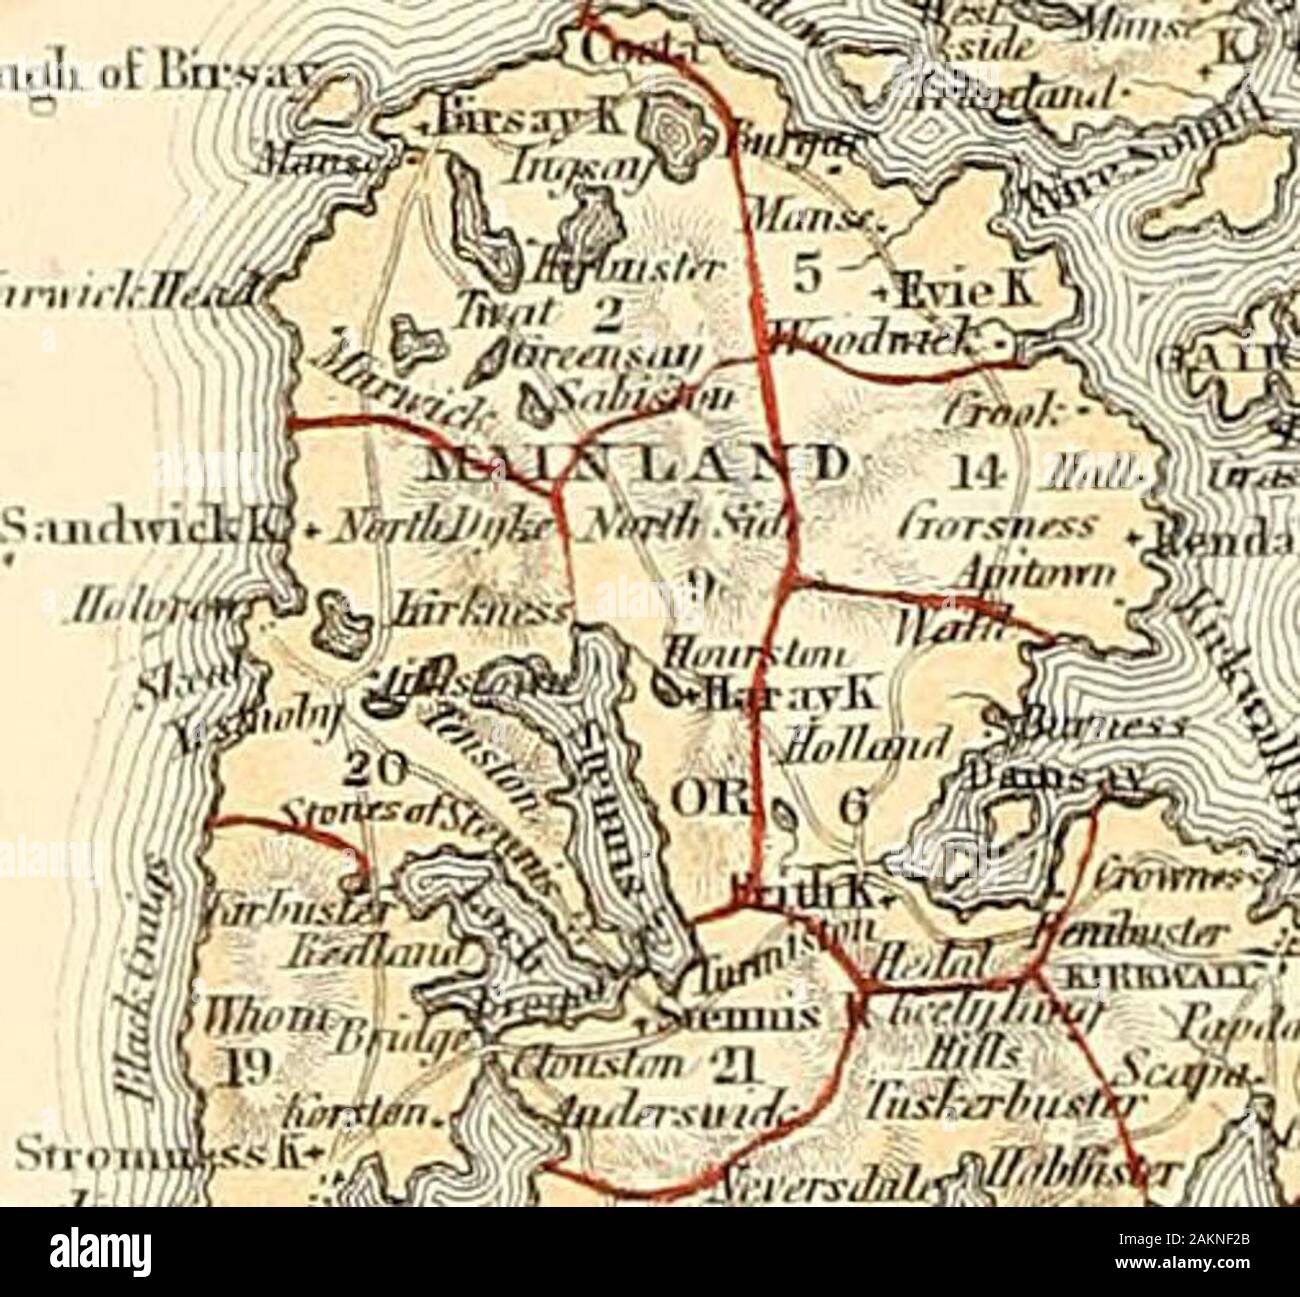 The imperial gazetteer of Scotland; or, Dictionary of Scottish topography, compiled from the most recent authorities, and forming a complete body of Scottish geography, physical, statistical, and historical . INDEX TO EAMSHES 1 BurnfSs It Sn€i ? Jtrr.f1/1/ 13 Orp/irr- 3 Ovss M SaiiaU, 4- Jleemess 15 SUndnnts 5 Irk Hi SB/idwlas 6 Bill, 17 StOks 7 Hiilm IS StRrnrs S Hoi/ 19 Strmrmess 9 Sarin/ 20 Sanimek 10 Xa3y 3 Stums n Liji/ n ieui- ?3 Kills British ifilesl v 3 * -. sk.-.,sSii-s Afe*5{vW^Sy i:,„i.iUi„o • j. JI STRUSSAY Sl &lt;Ps.:. I.iu.wS«im.H tfr.&lt;.-J.ITK.u-.!.A» i &JUS-^Jlpf V- •i; /f Stock Photo